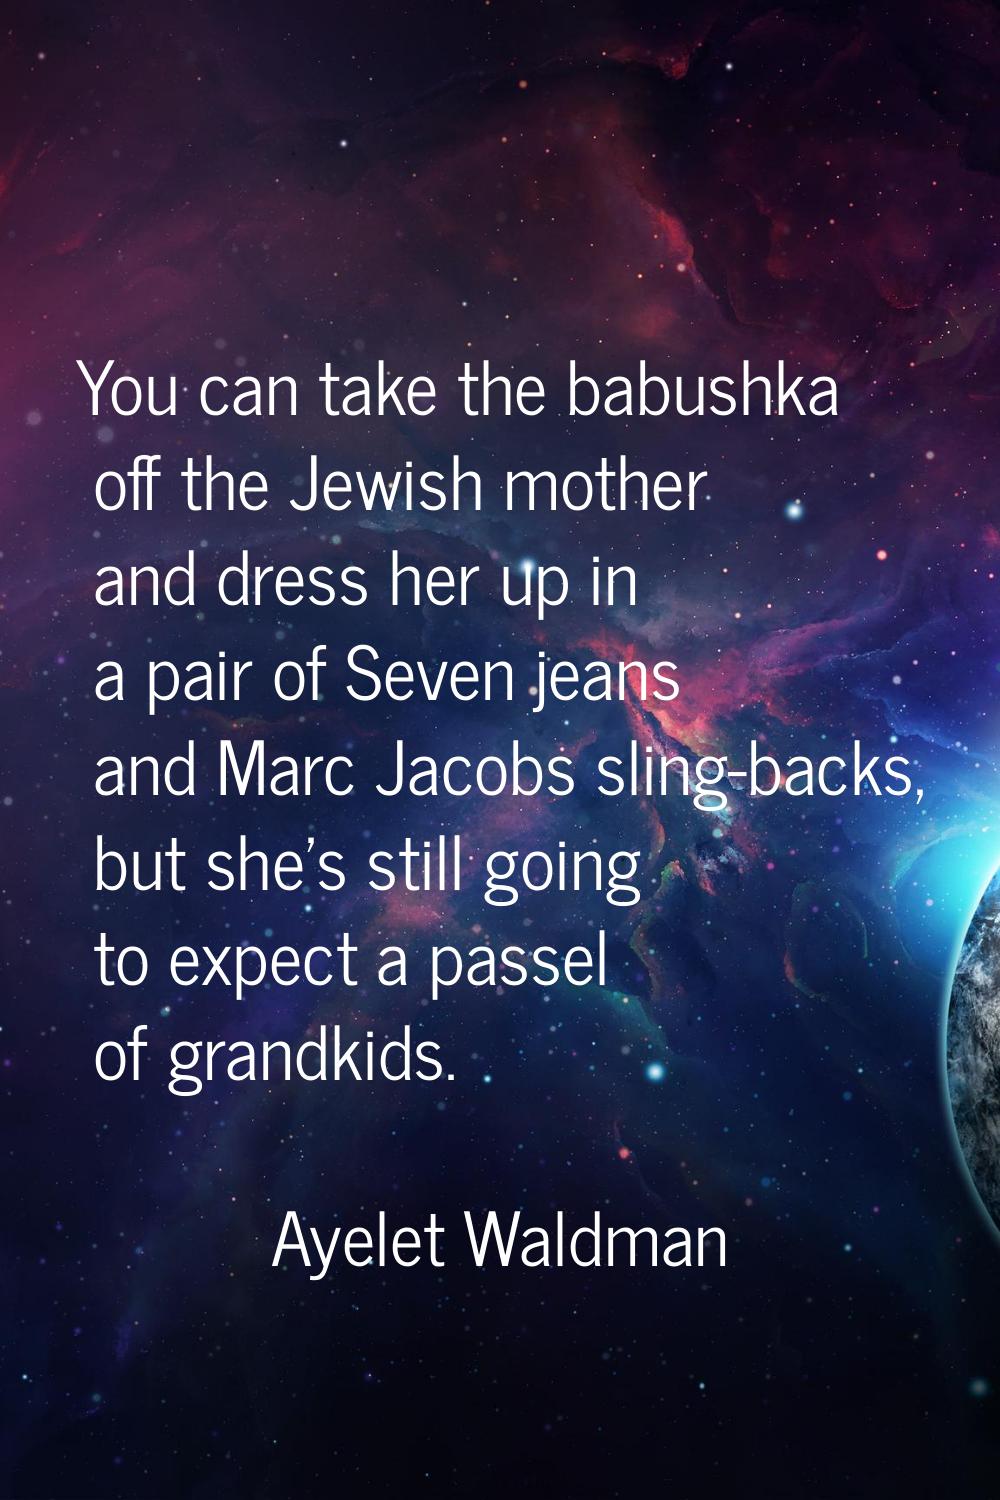 You can take the babushka off the Jewish mother and dress her up in a pair of Seven jeans and Marc 